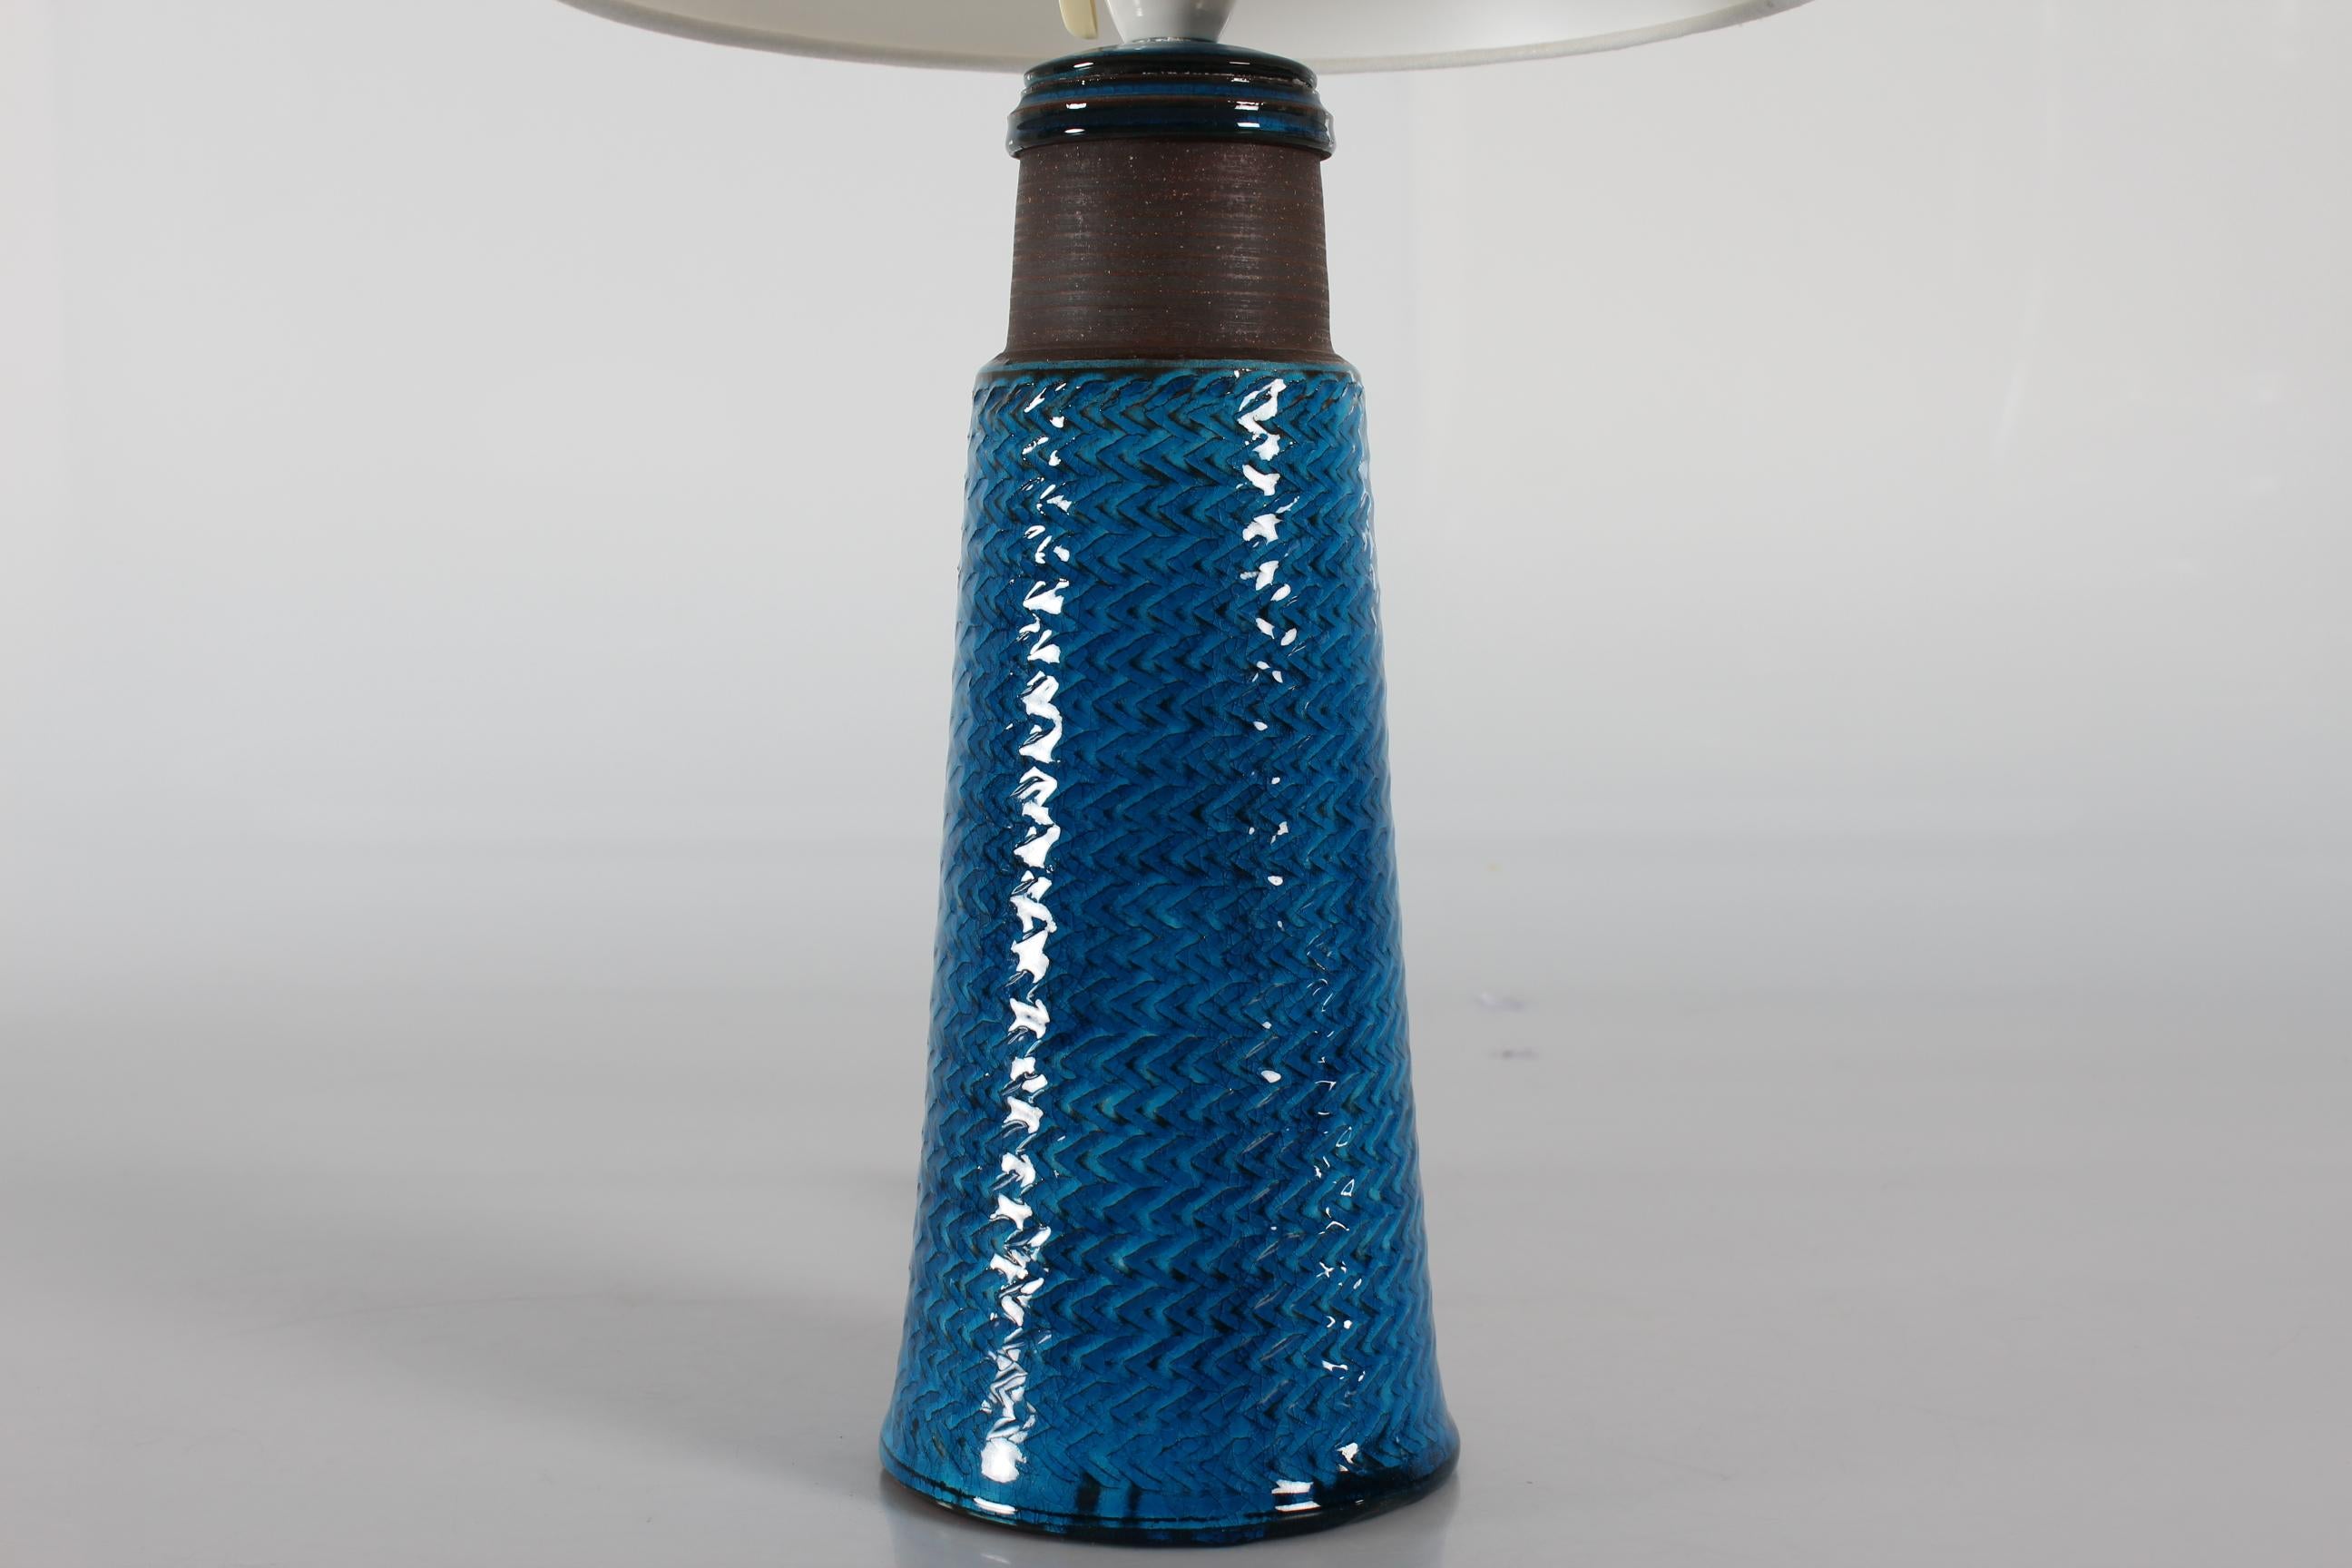 High table lamp by Nils Kähler made at Herman A. Kähler´s ceramic workshop in Denmark in the 1960s. 
This Lamp is a tall version.

Nils Kähler (1906-1979) was fourth generation of the family Kähler. He and his brother Herman Jørgen Kähler, who were